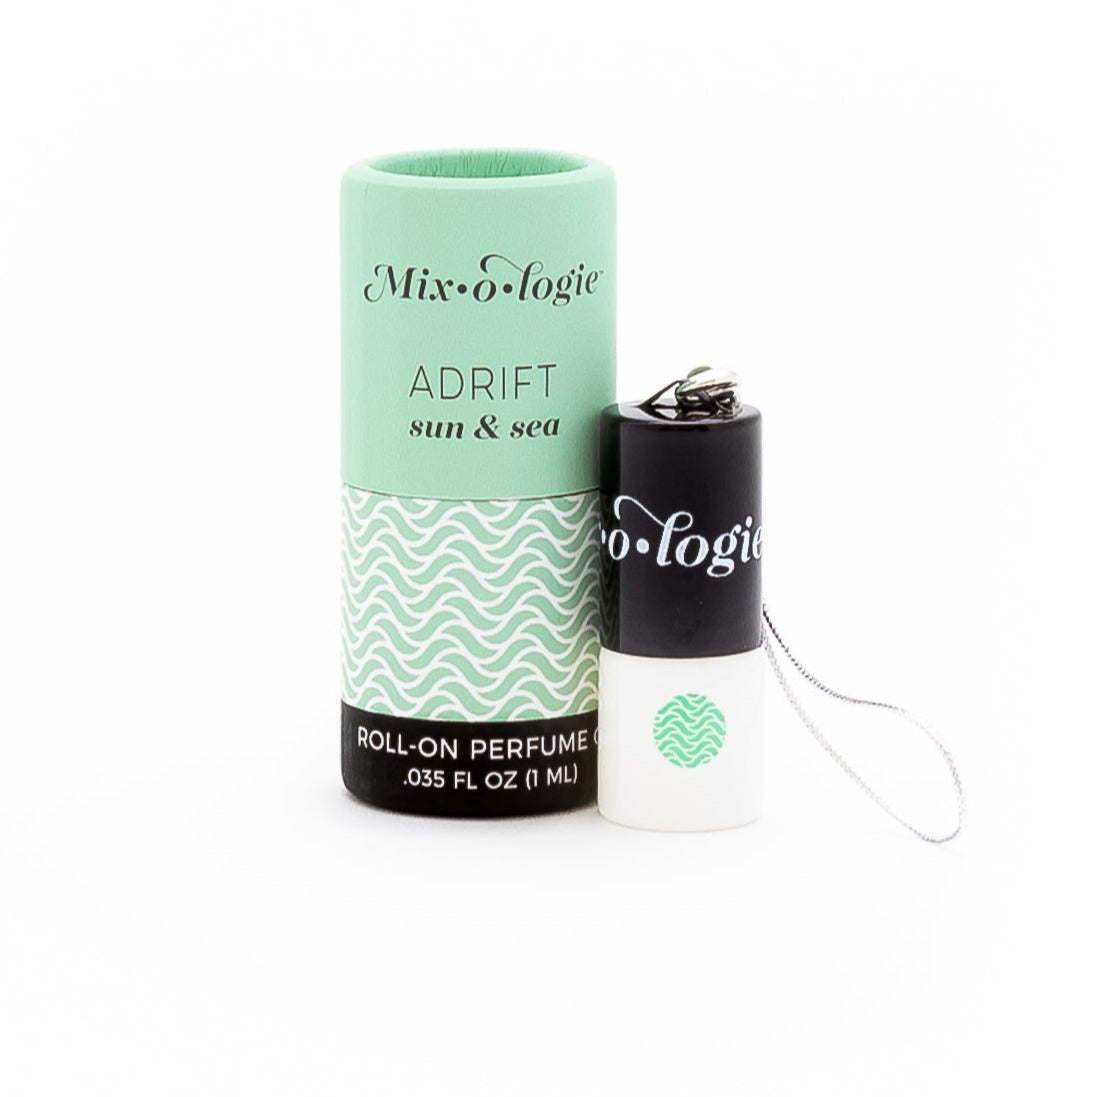 Adrift sun and sea mini roll on perfume oil in 1 ML bottle with keychain lid.